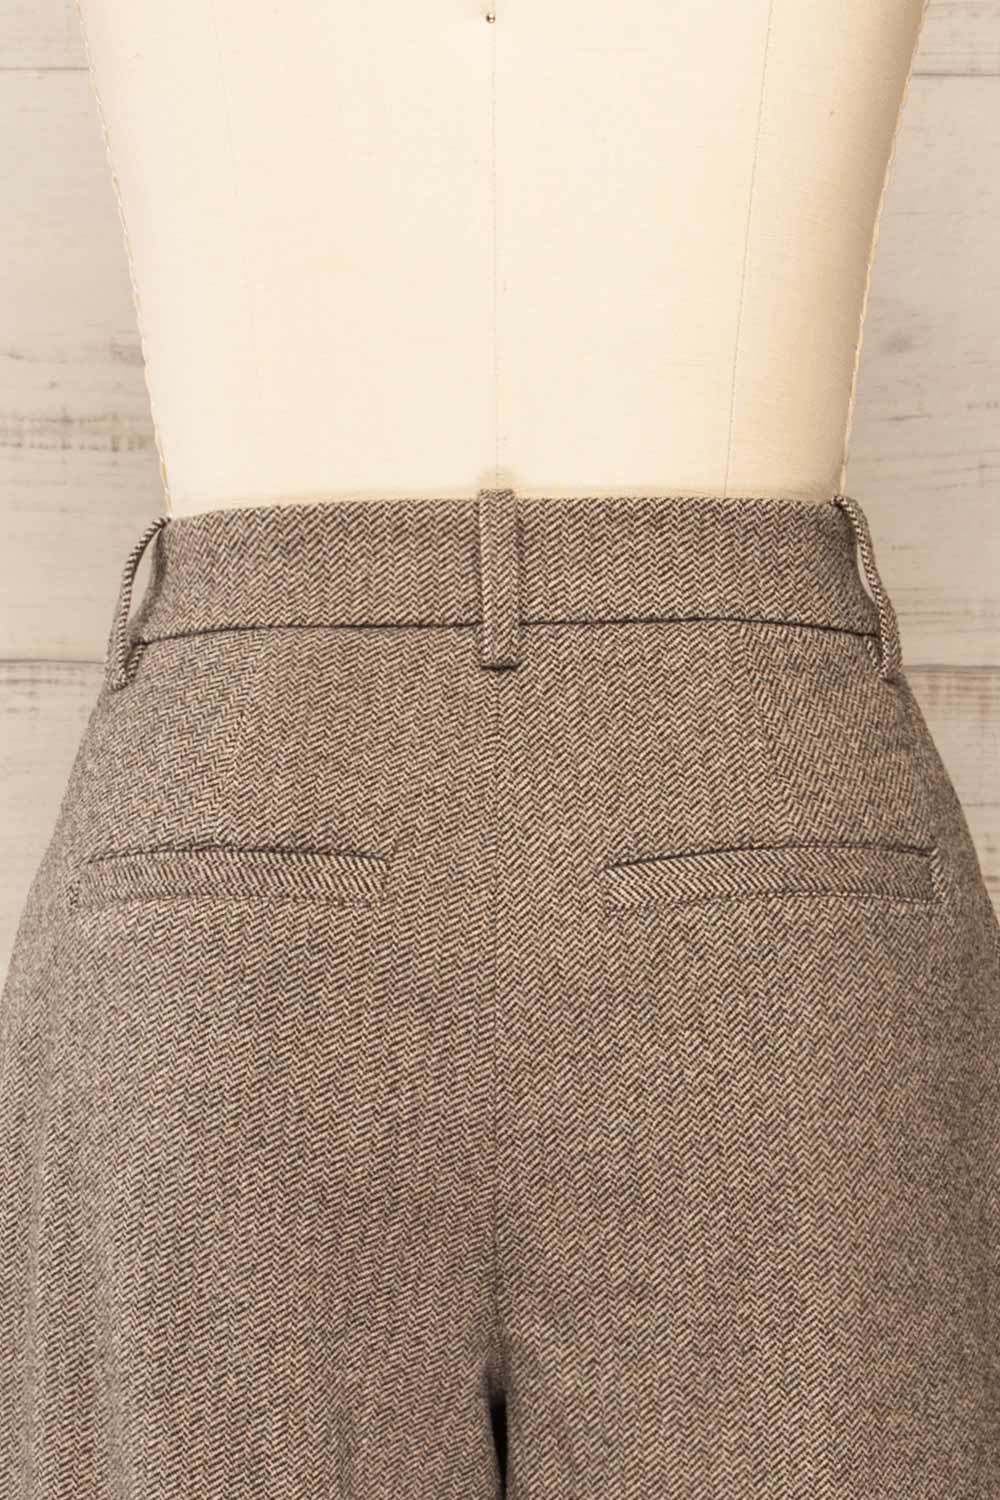 High Waisted Tweed Trousers Wool Blend Lined Pants Waist 27